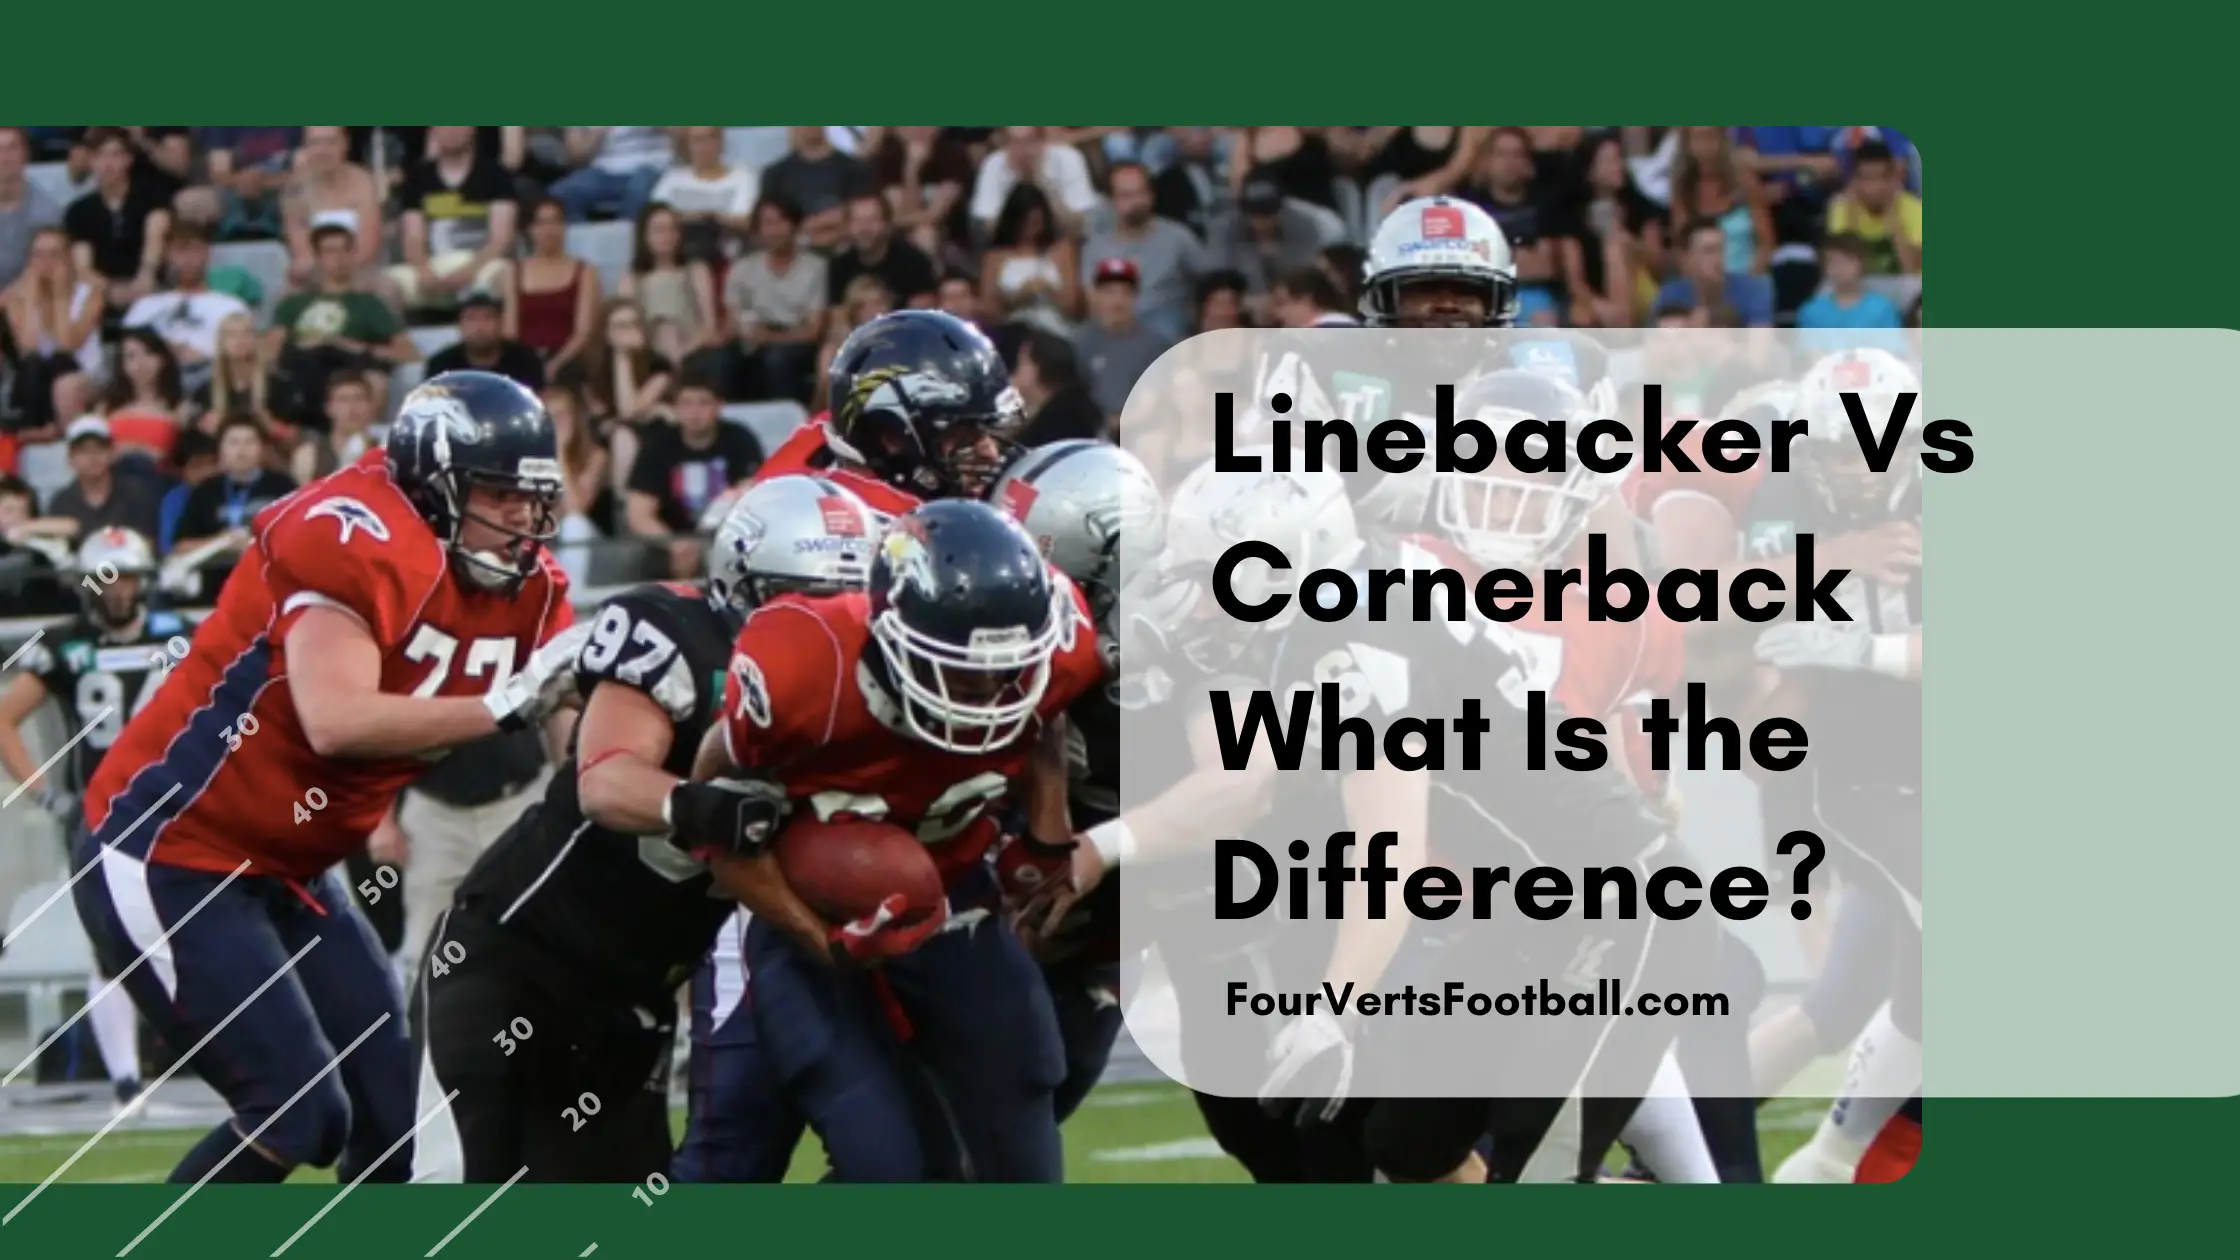 Linebacker VS Cornerback What Is The Difference?